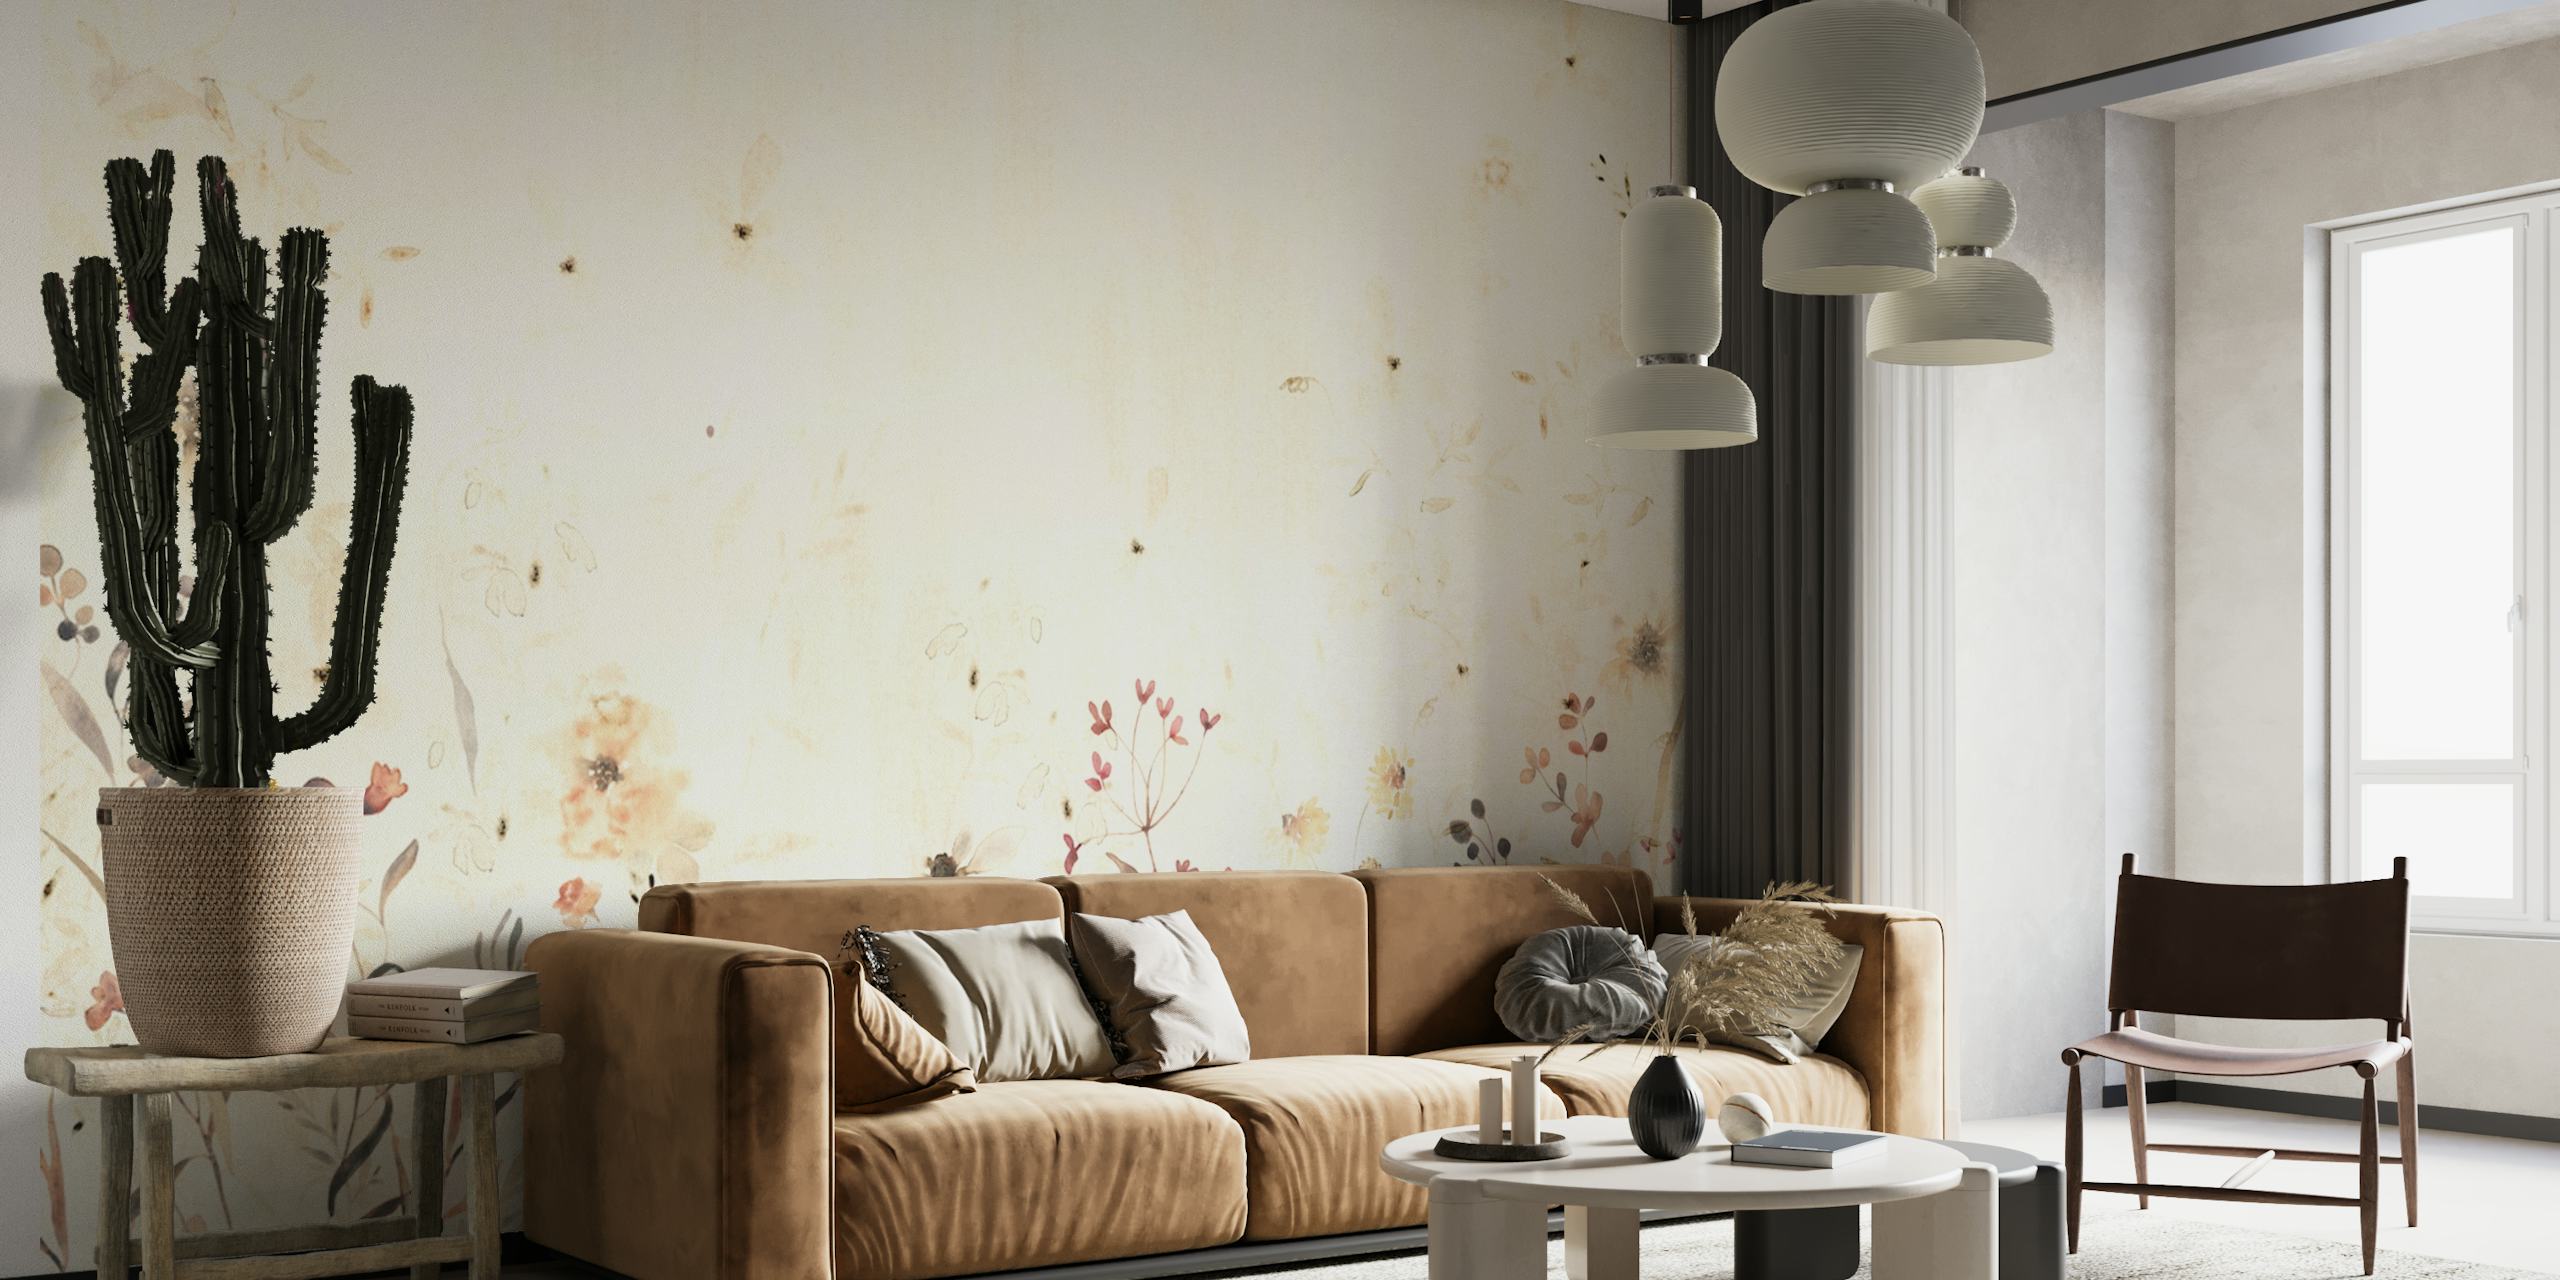 Neutral watercolor floral pattern on a wall mural with soft, serene botanical elements